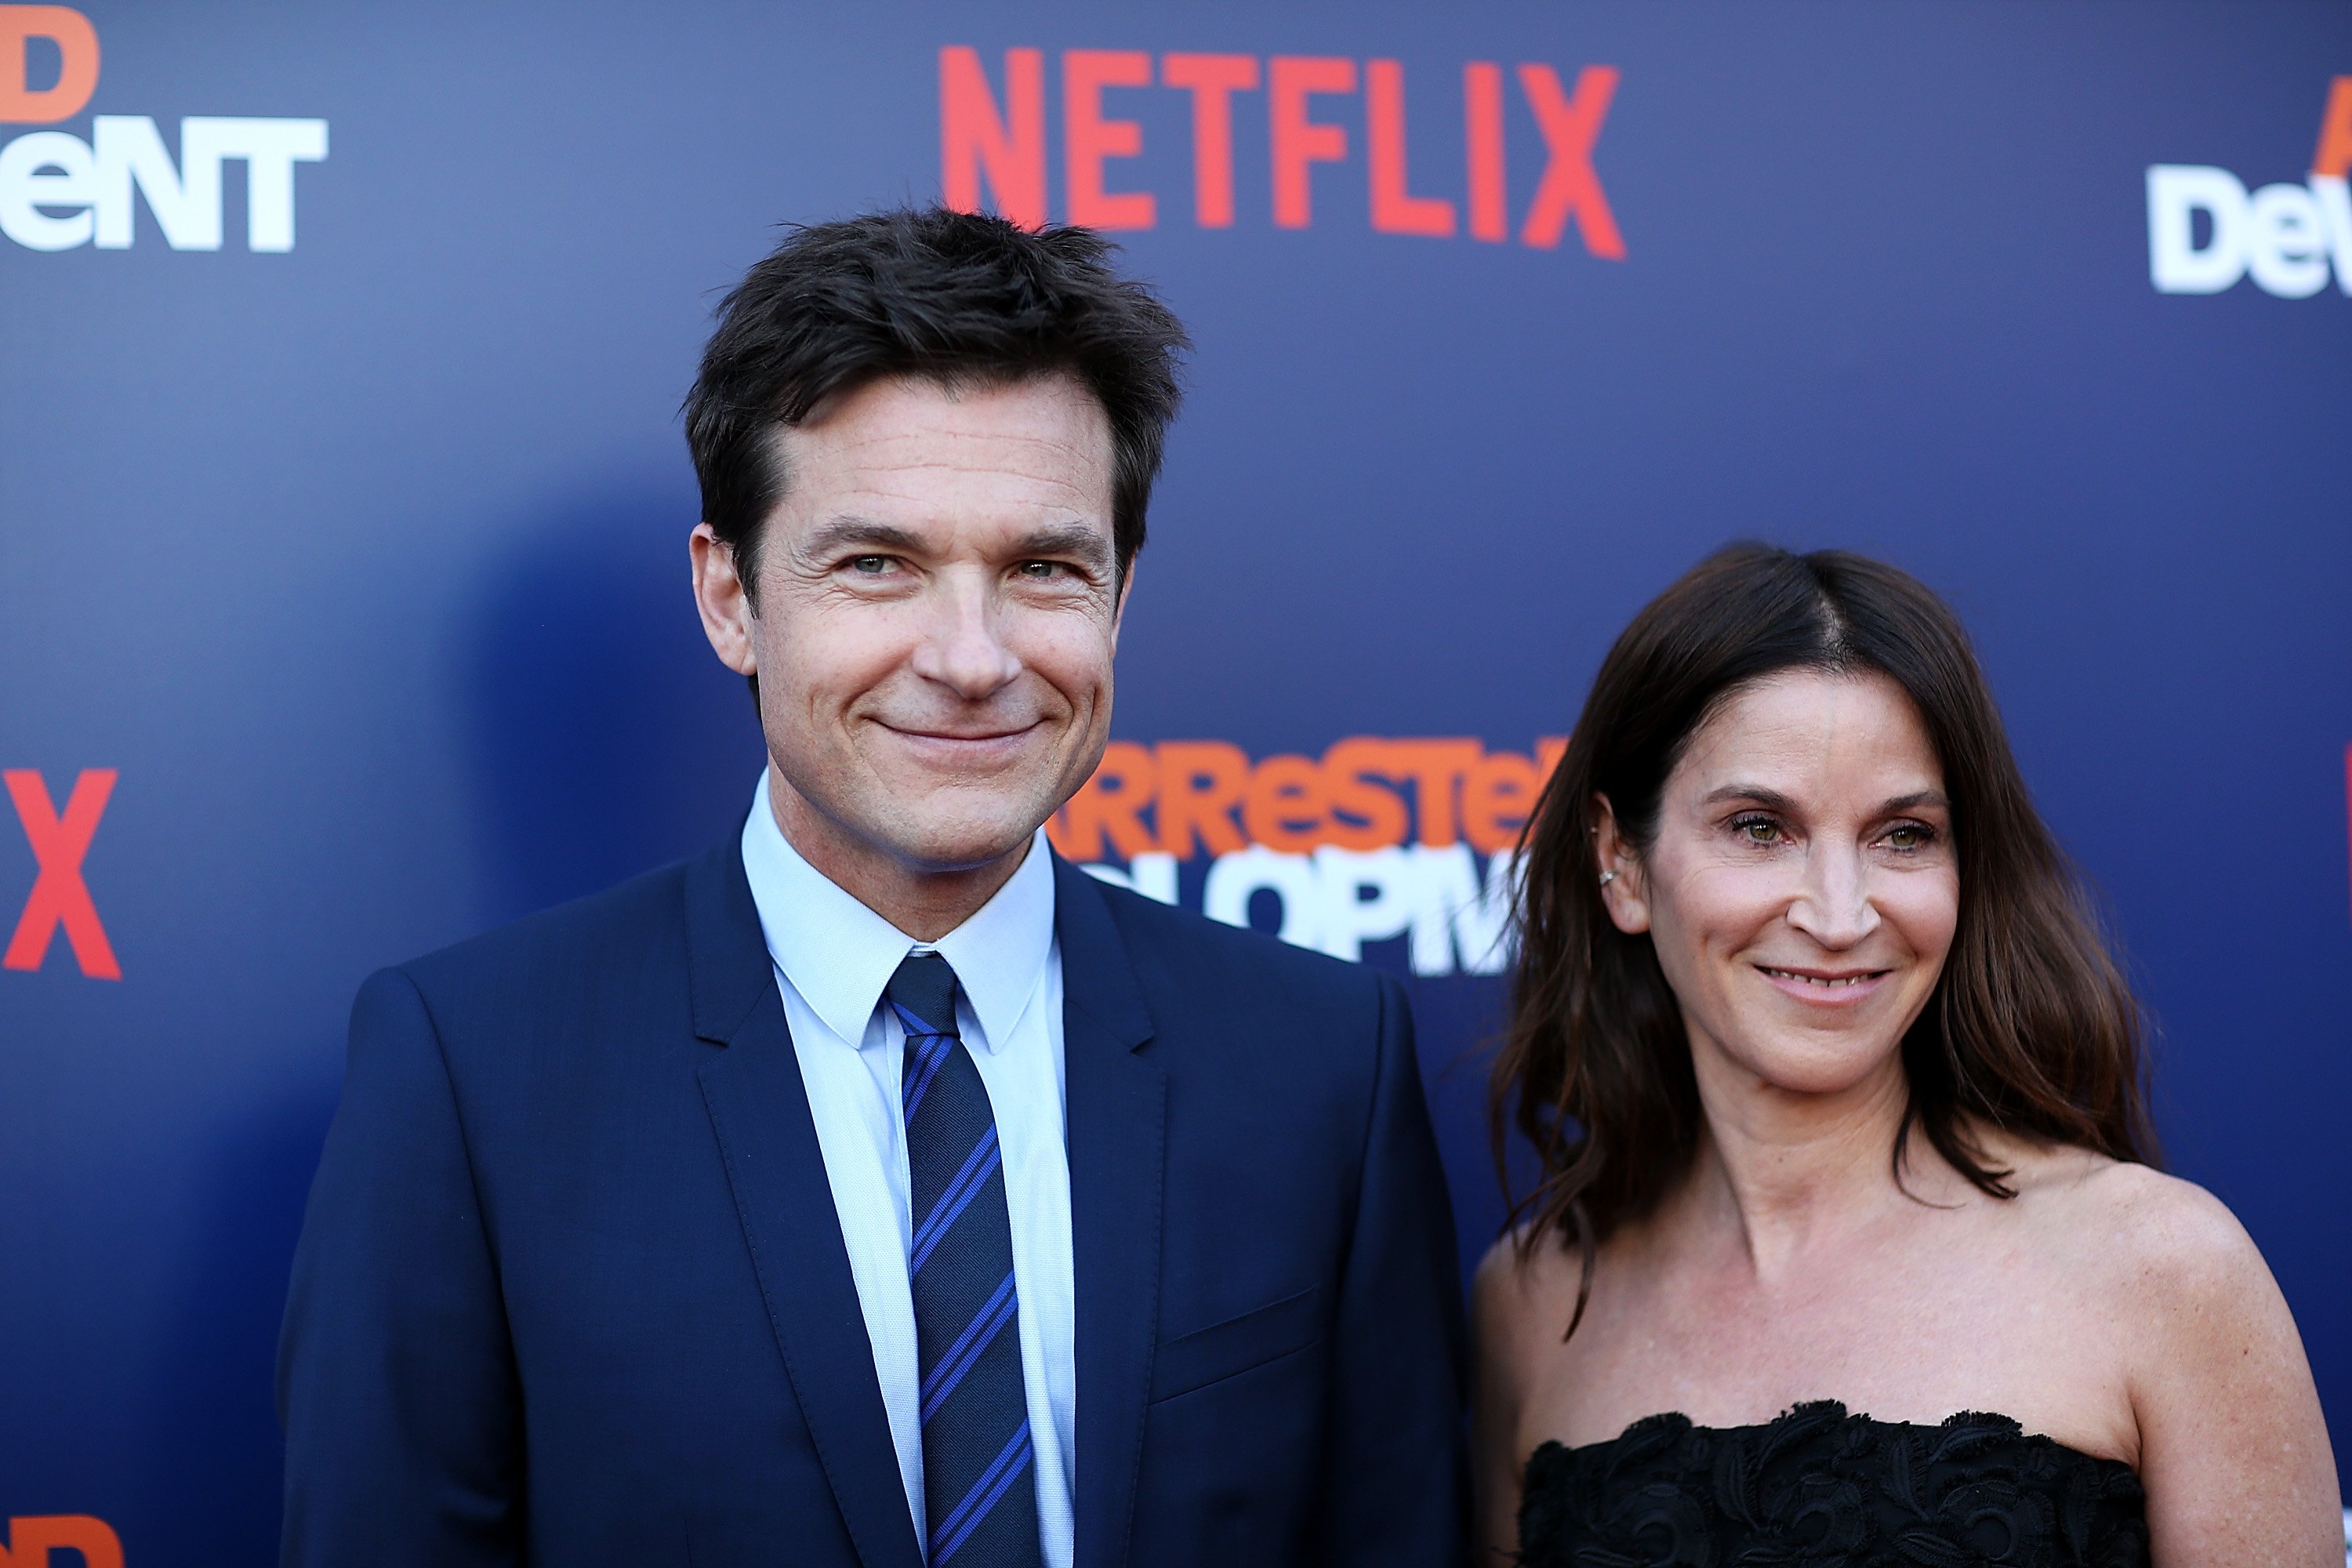 Jason Bateman and wife, Amanda, smile on the carpet at the premiere of Netflix's Arrested Development